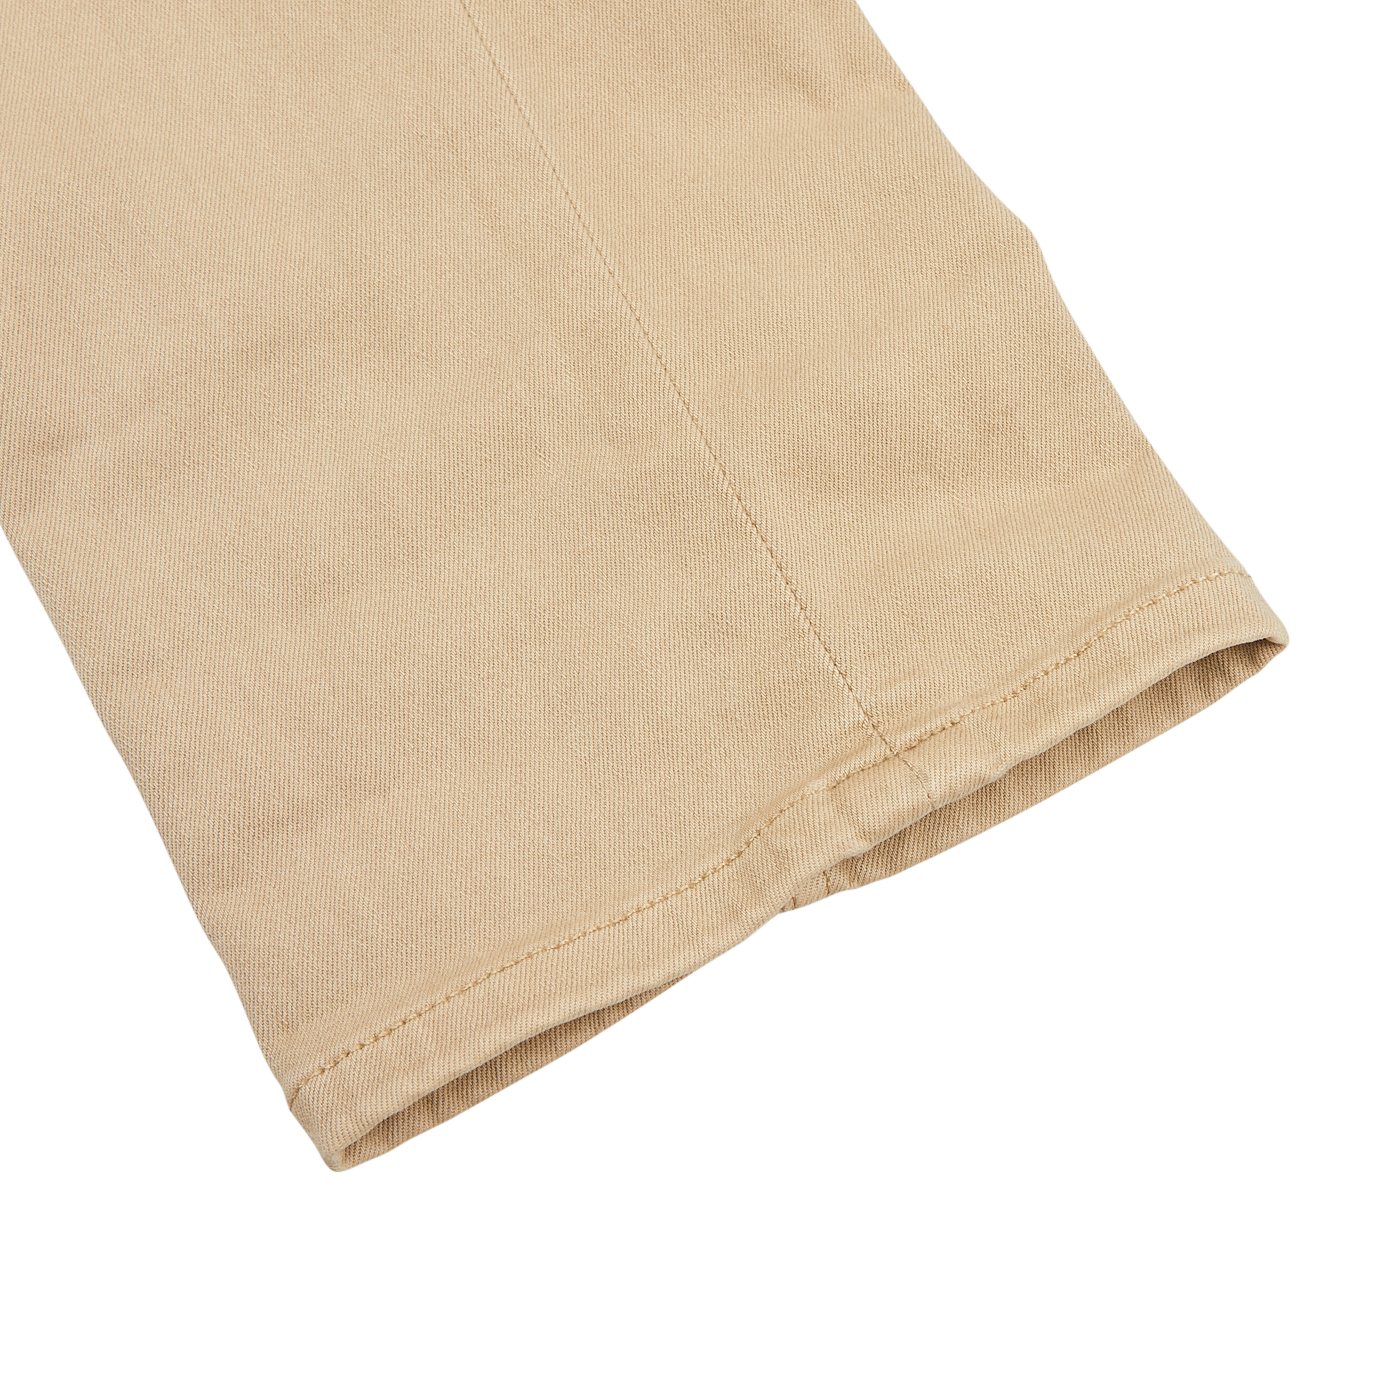 Close-up of a beige fabric sleeve with visible stitching on a white background, showcasing the comfortable fit and quality craftsmanship typical of Paige Caramel Beige Cotton Transcend Federal Slim Jeans.